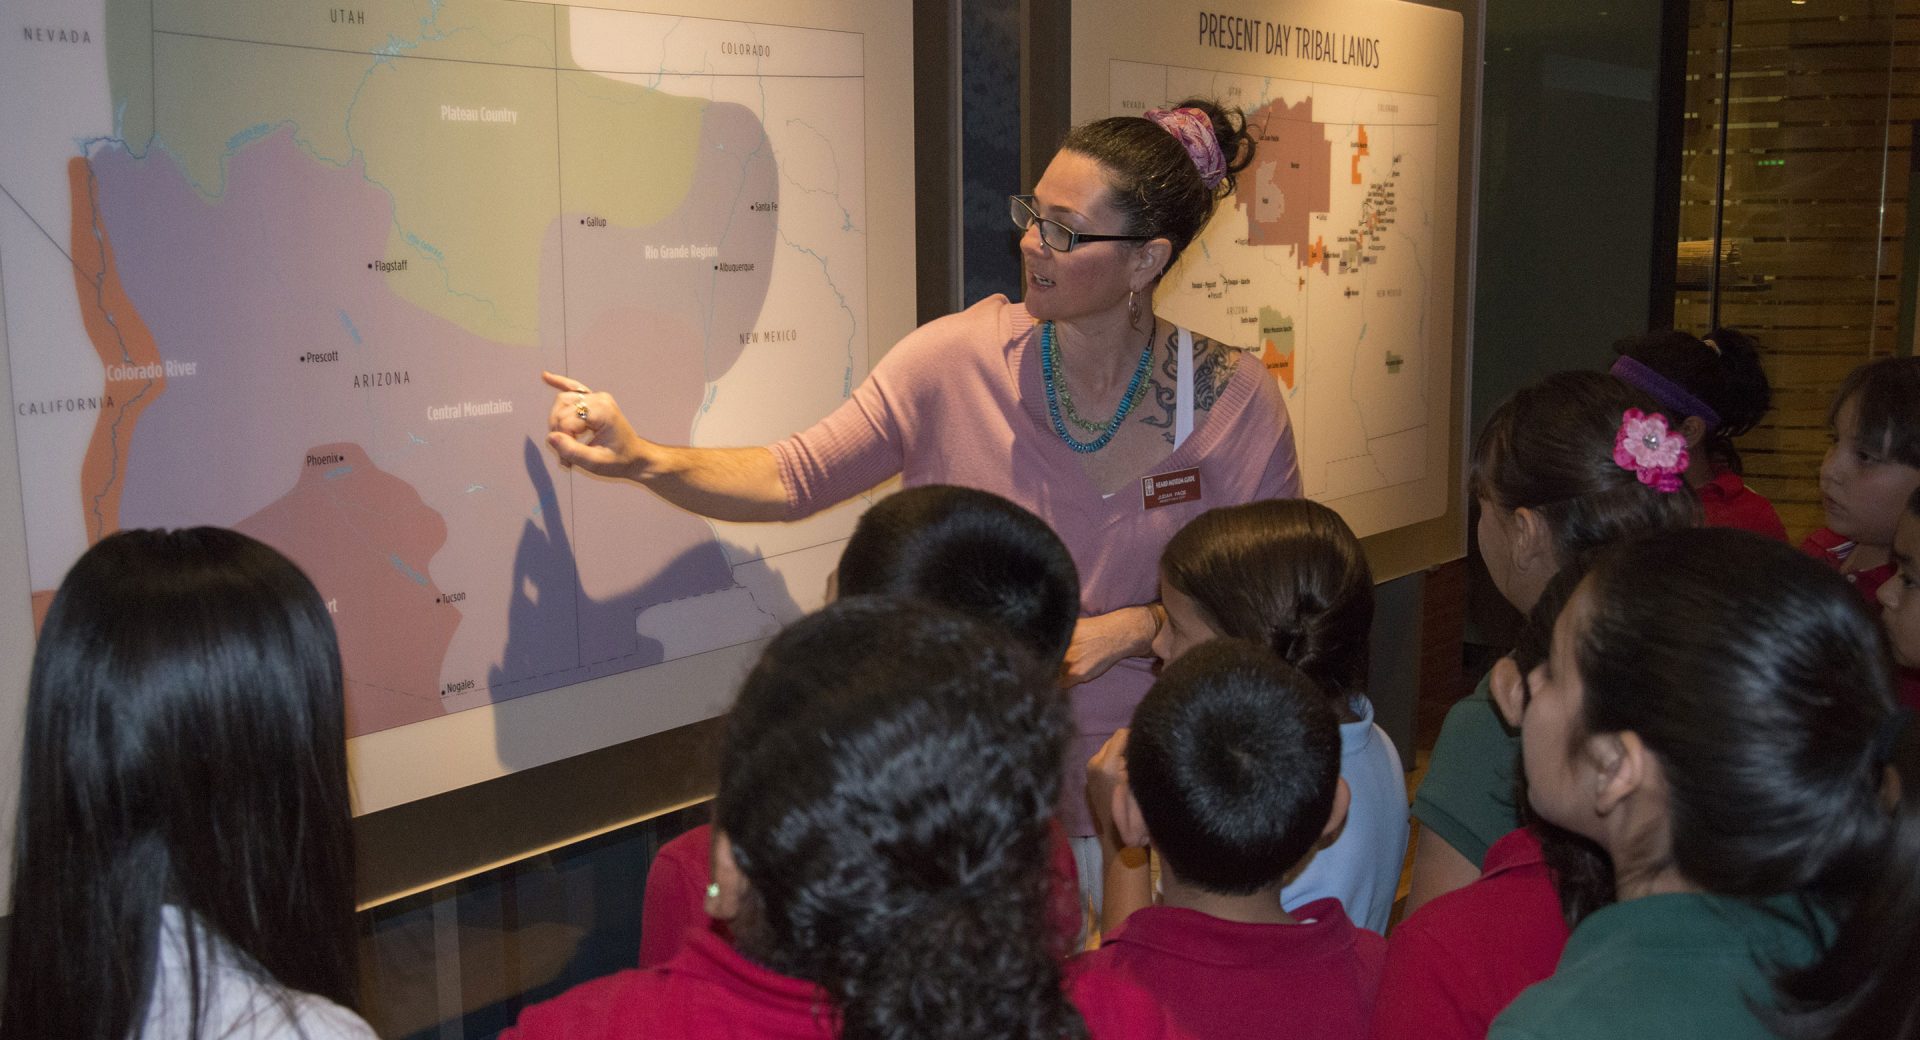 A woman pointing to a map in front of a group of children.